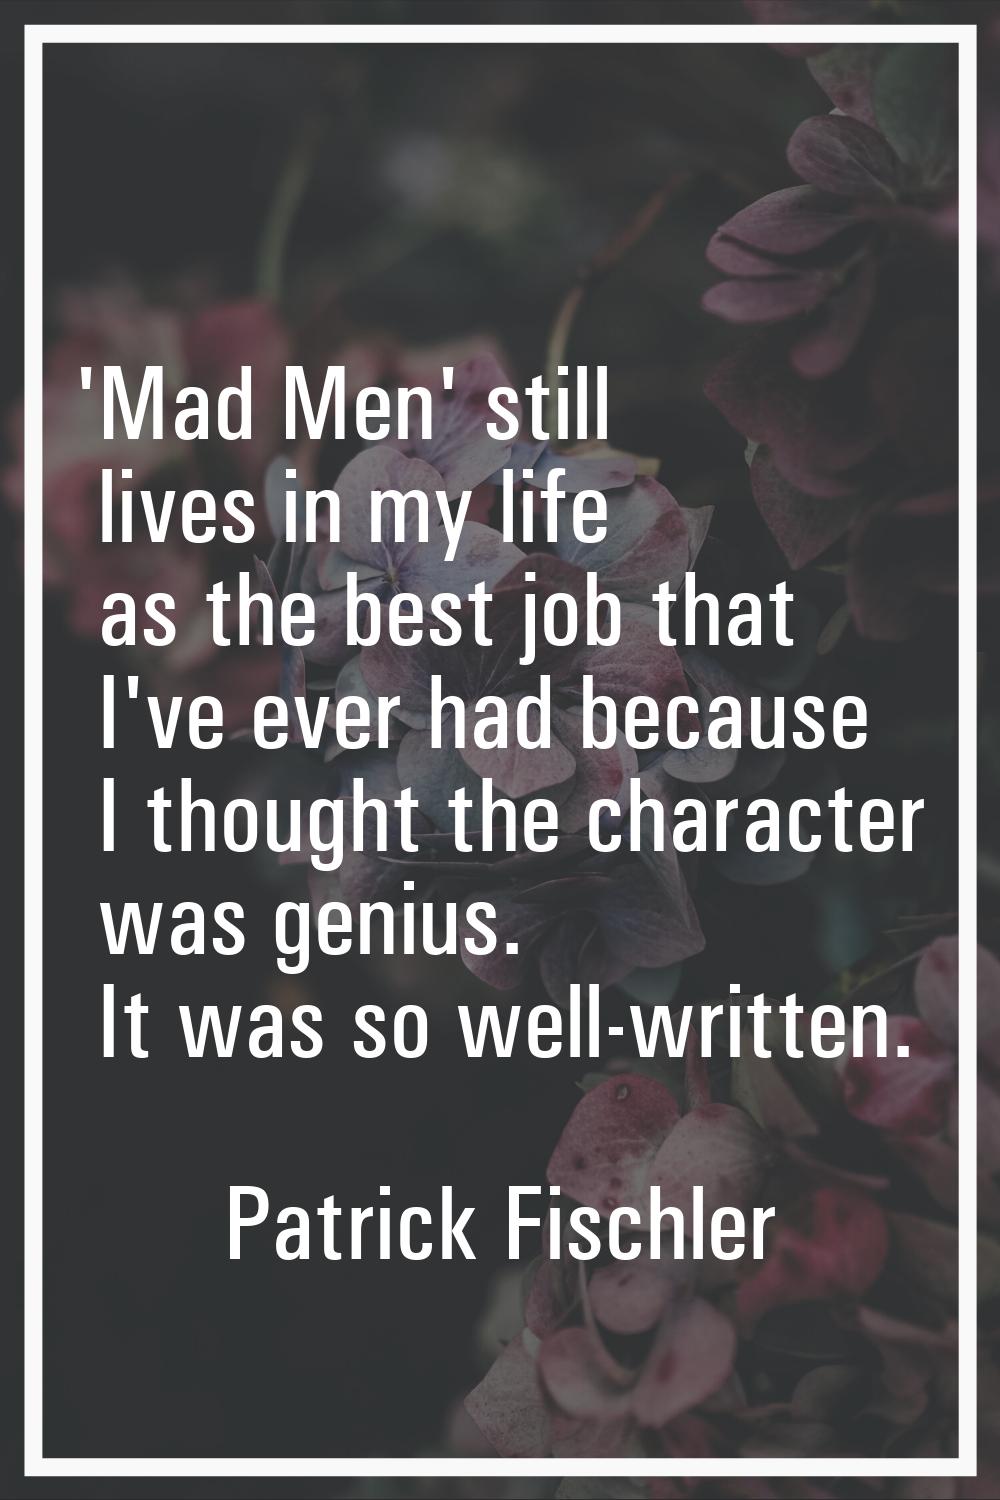 'Mad Men' still lives in my life as the best job that I've ever had because I thought the character